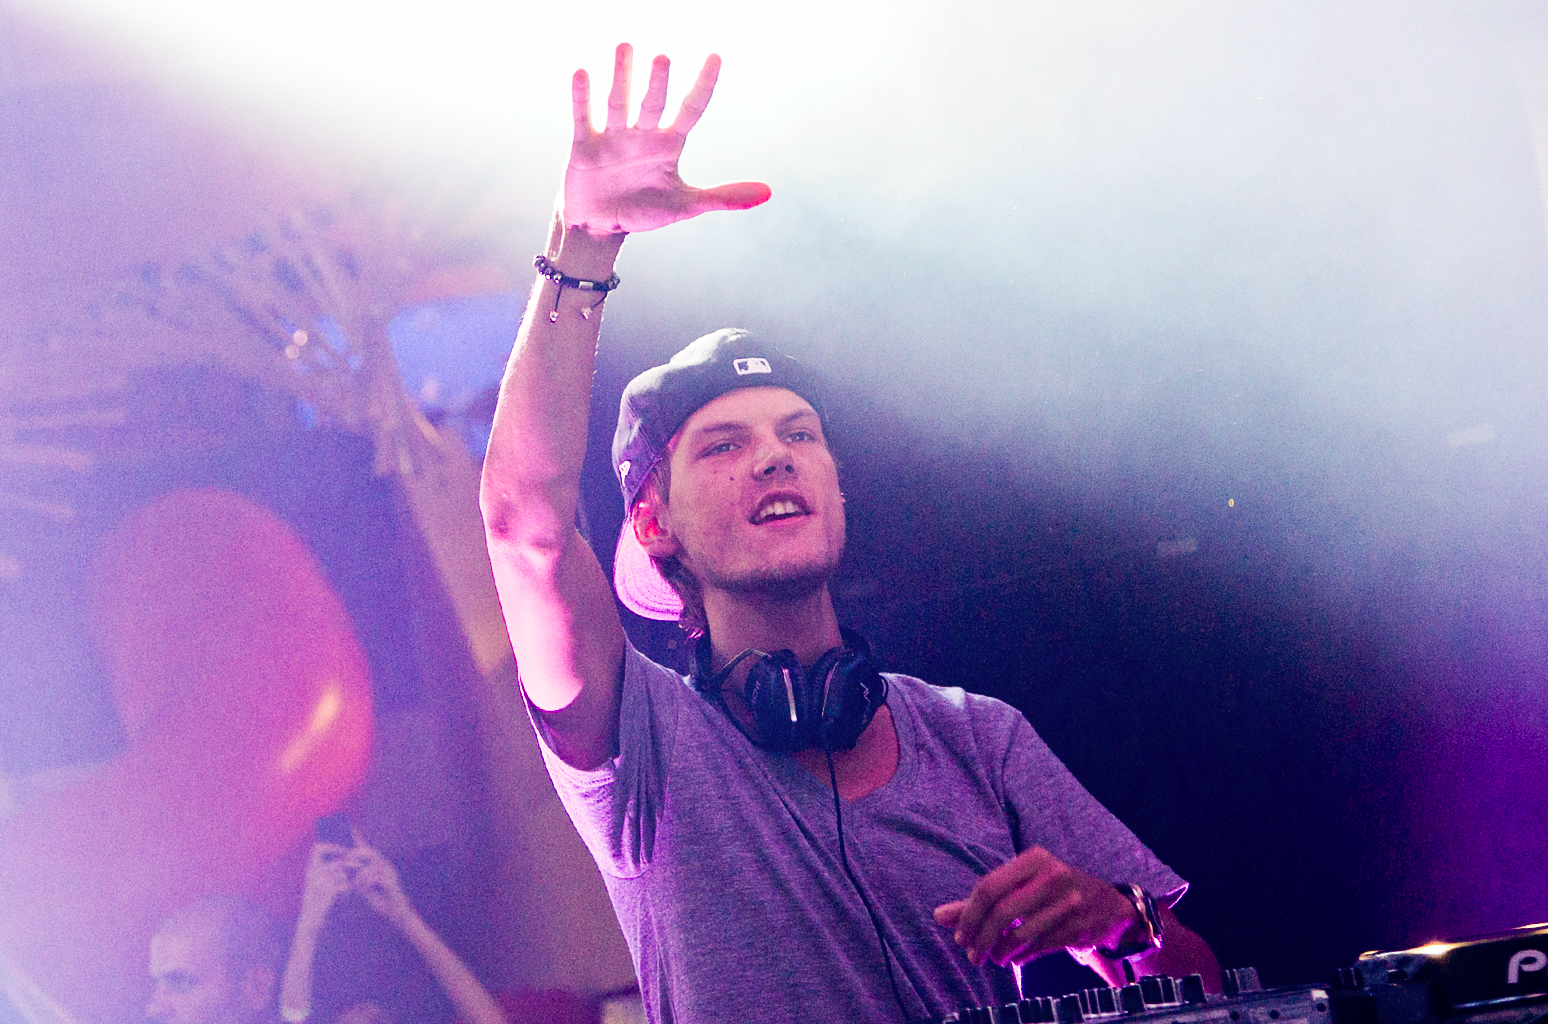 Release Date For Avicii’s Video Game Has Been Revealed